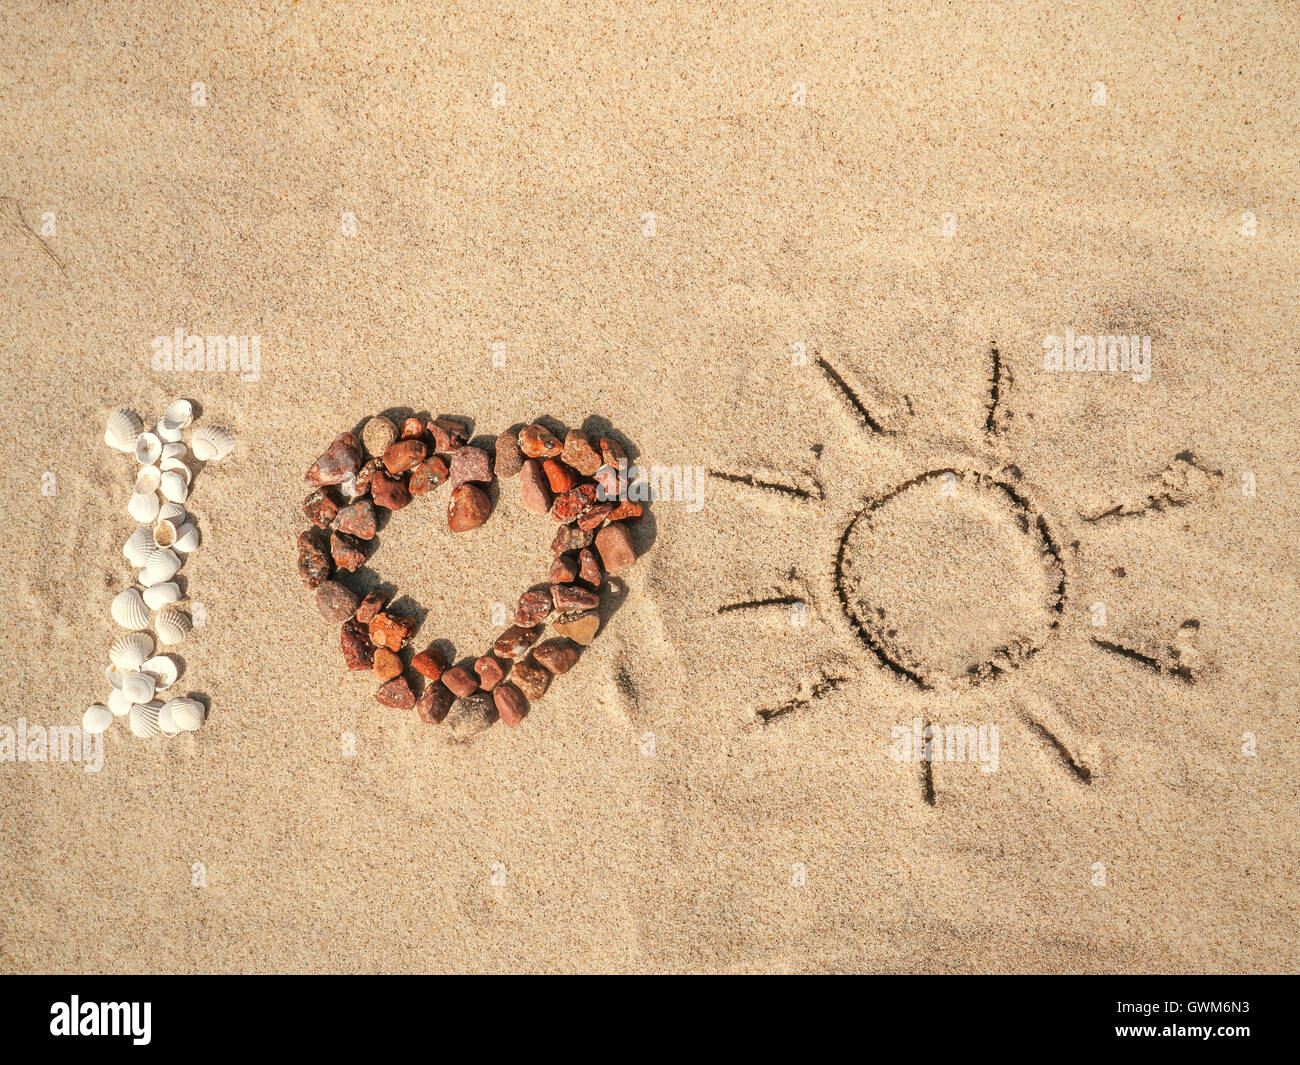 Conceptual shot of I Love Sun as acronym arranged from seashells, red pebbles and hand-drawn sun sign on beach sand Stock Photo